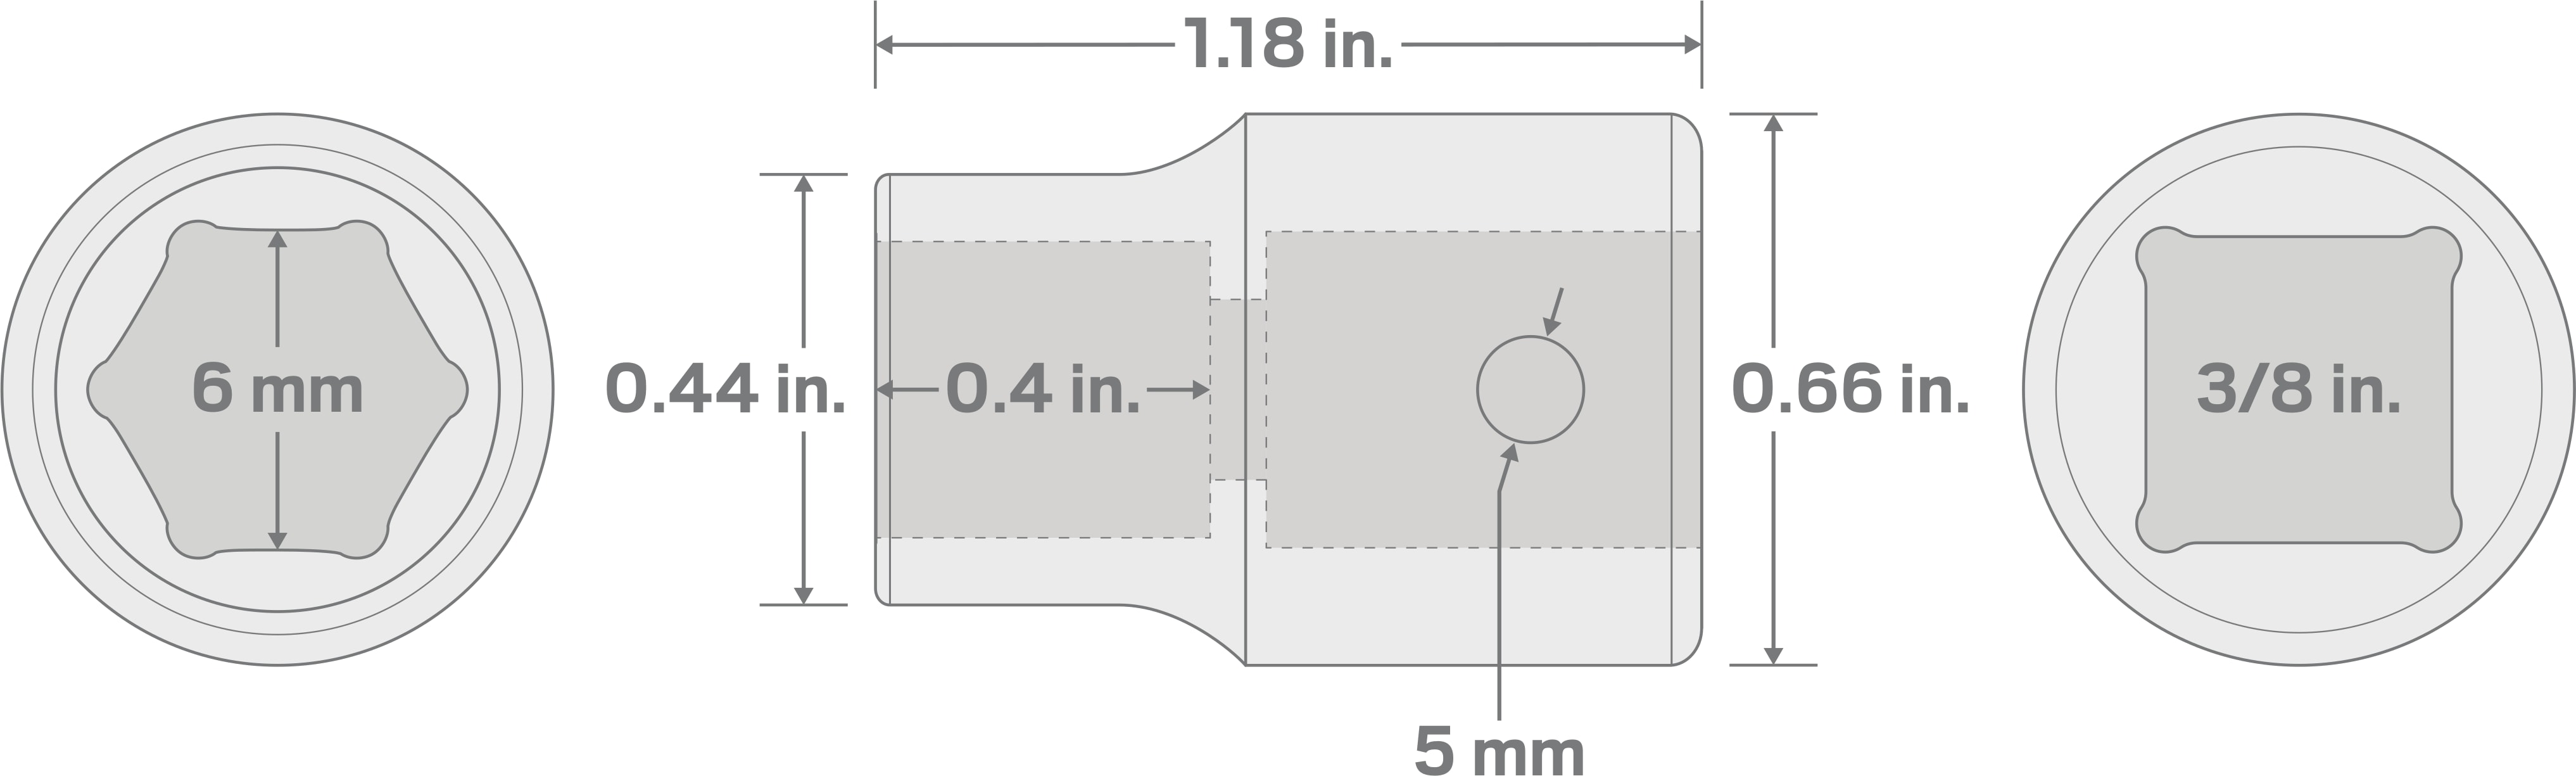 Specs for 3/8 Inch Drive x 6 mm 6-Point Impact Socket